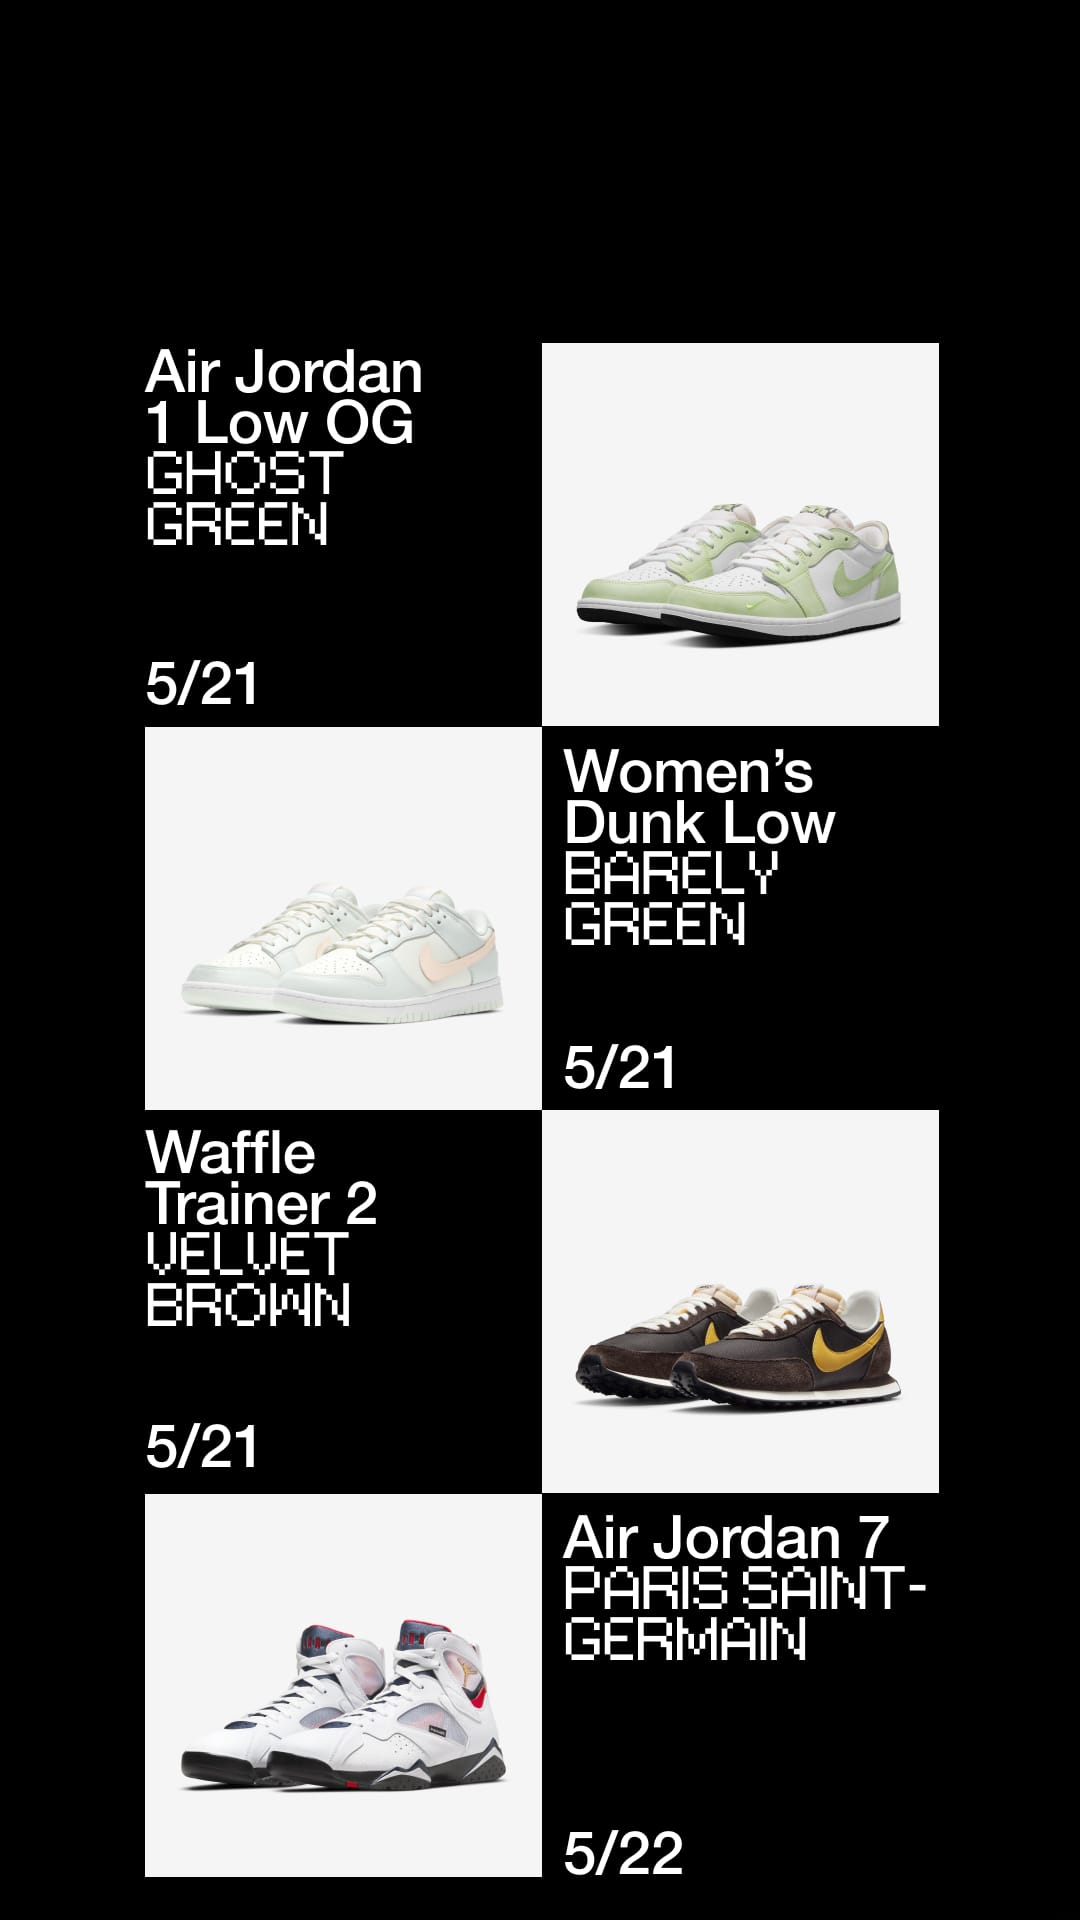 This Week In SNKRS:  05.16 - 05.22